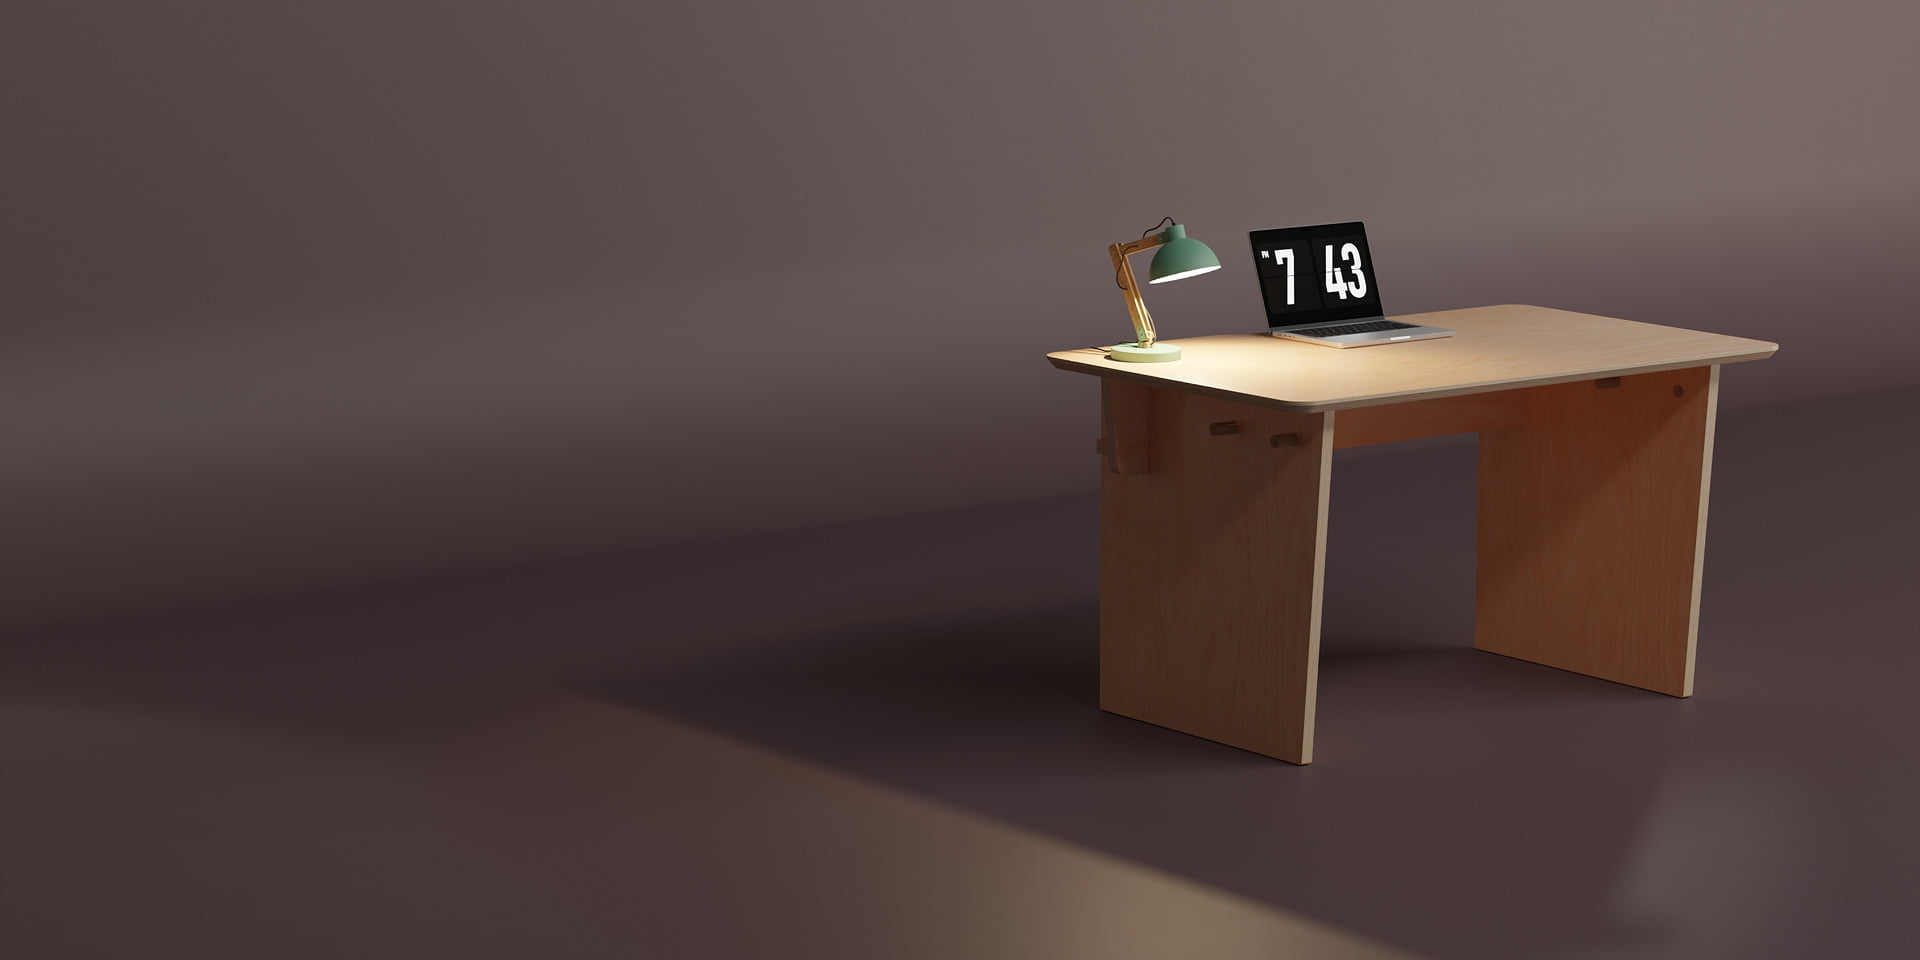 The Ecosium Stubby desk made from sustainable timber in Australia sitting on a muave background with a green desk lamp and an Apple laptop